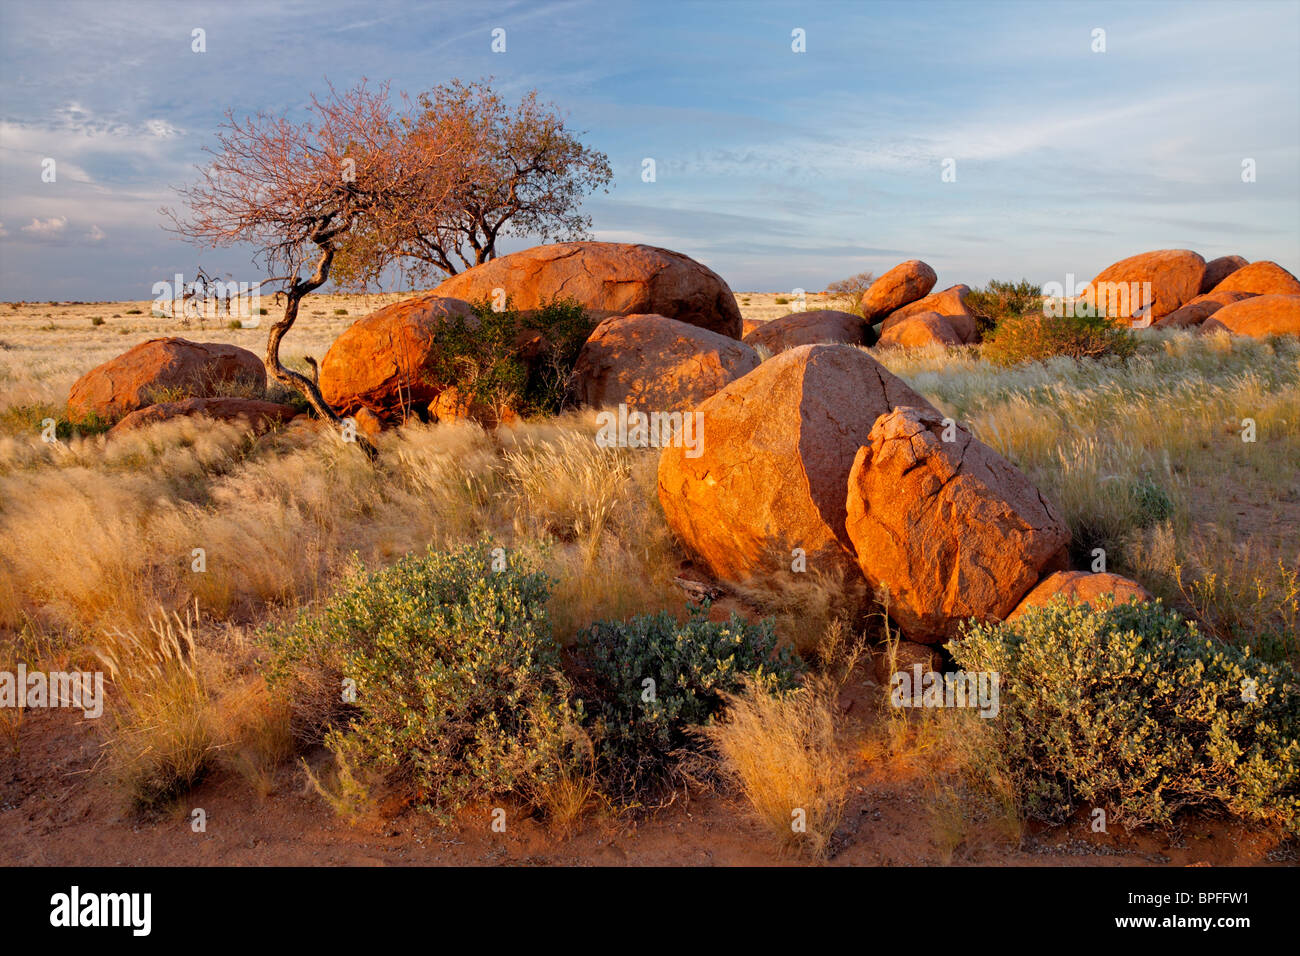 Landscape with granite boulders, trees and blue sky, Namibia, southern Africa Stock Photo